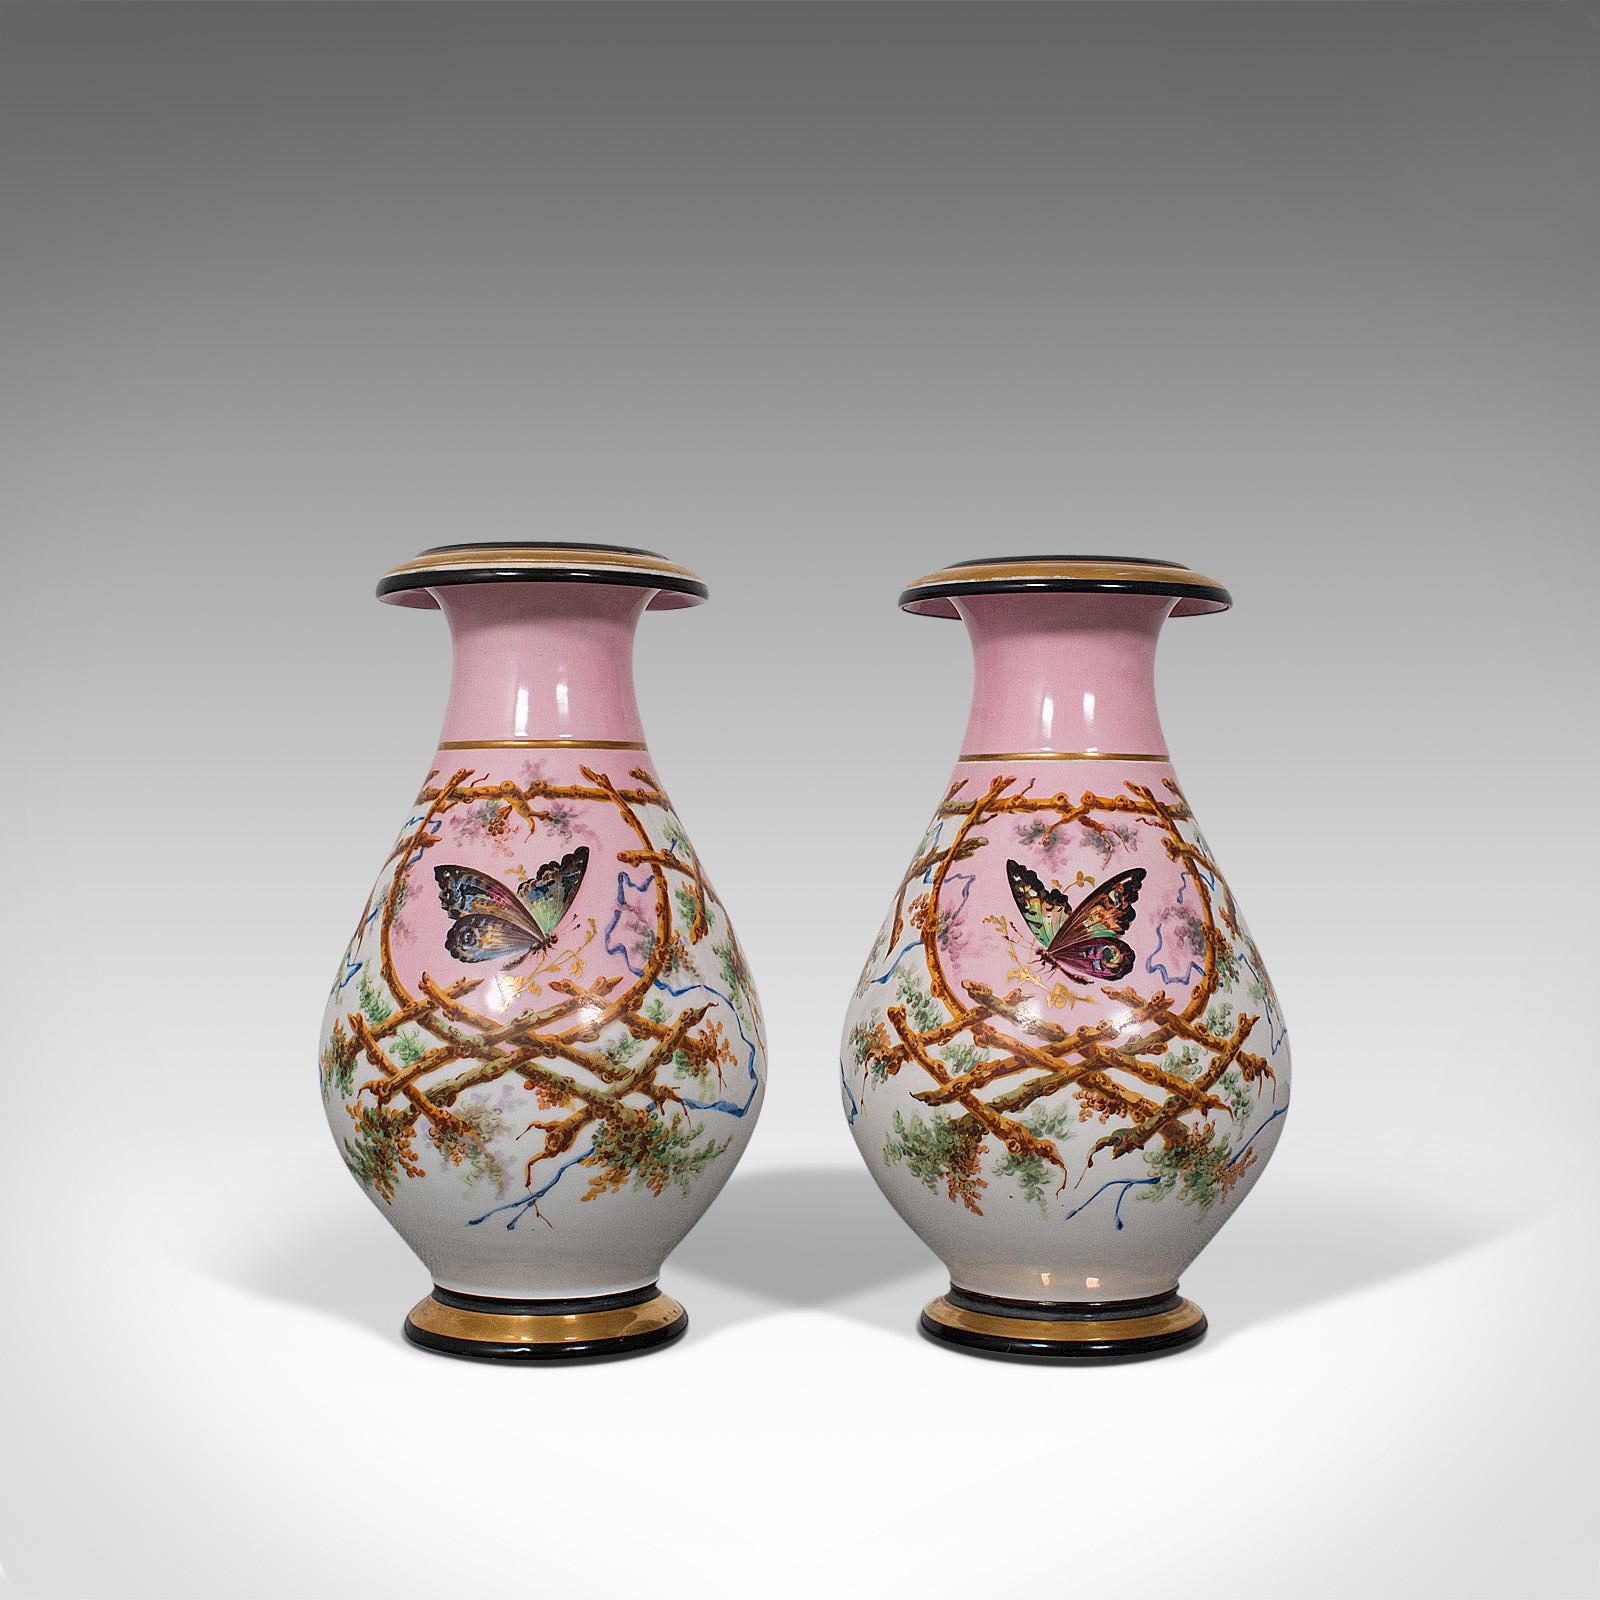 This is an antique pair of peony vases. A French, decorative ceramic baluster urn adorned with butterflies, dating to the late Victorian period, circa 1890.

Wonderfully decorative antique French vases
Displaying a desirable aged patina, superb